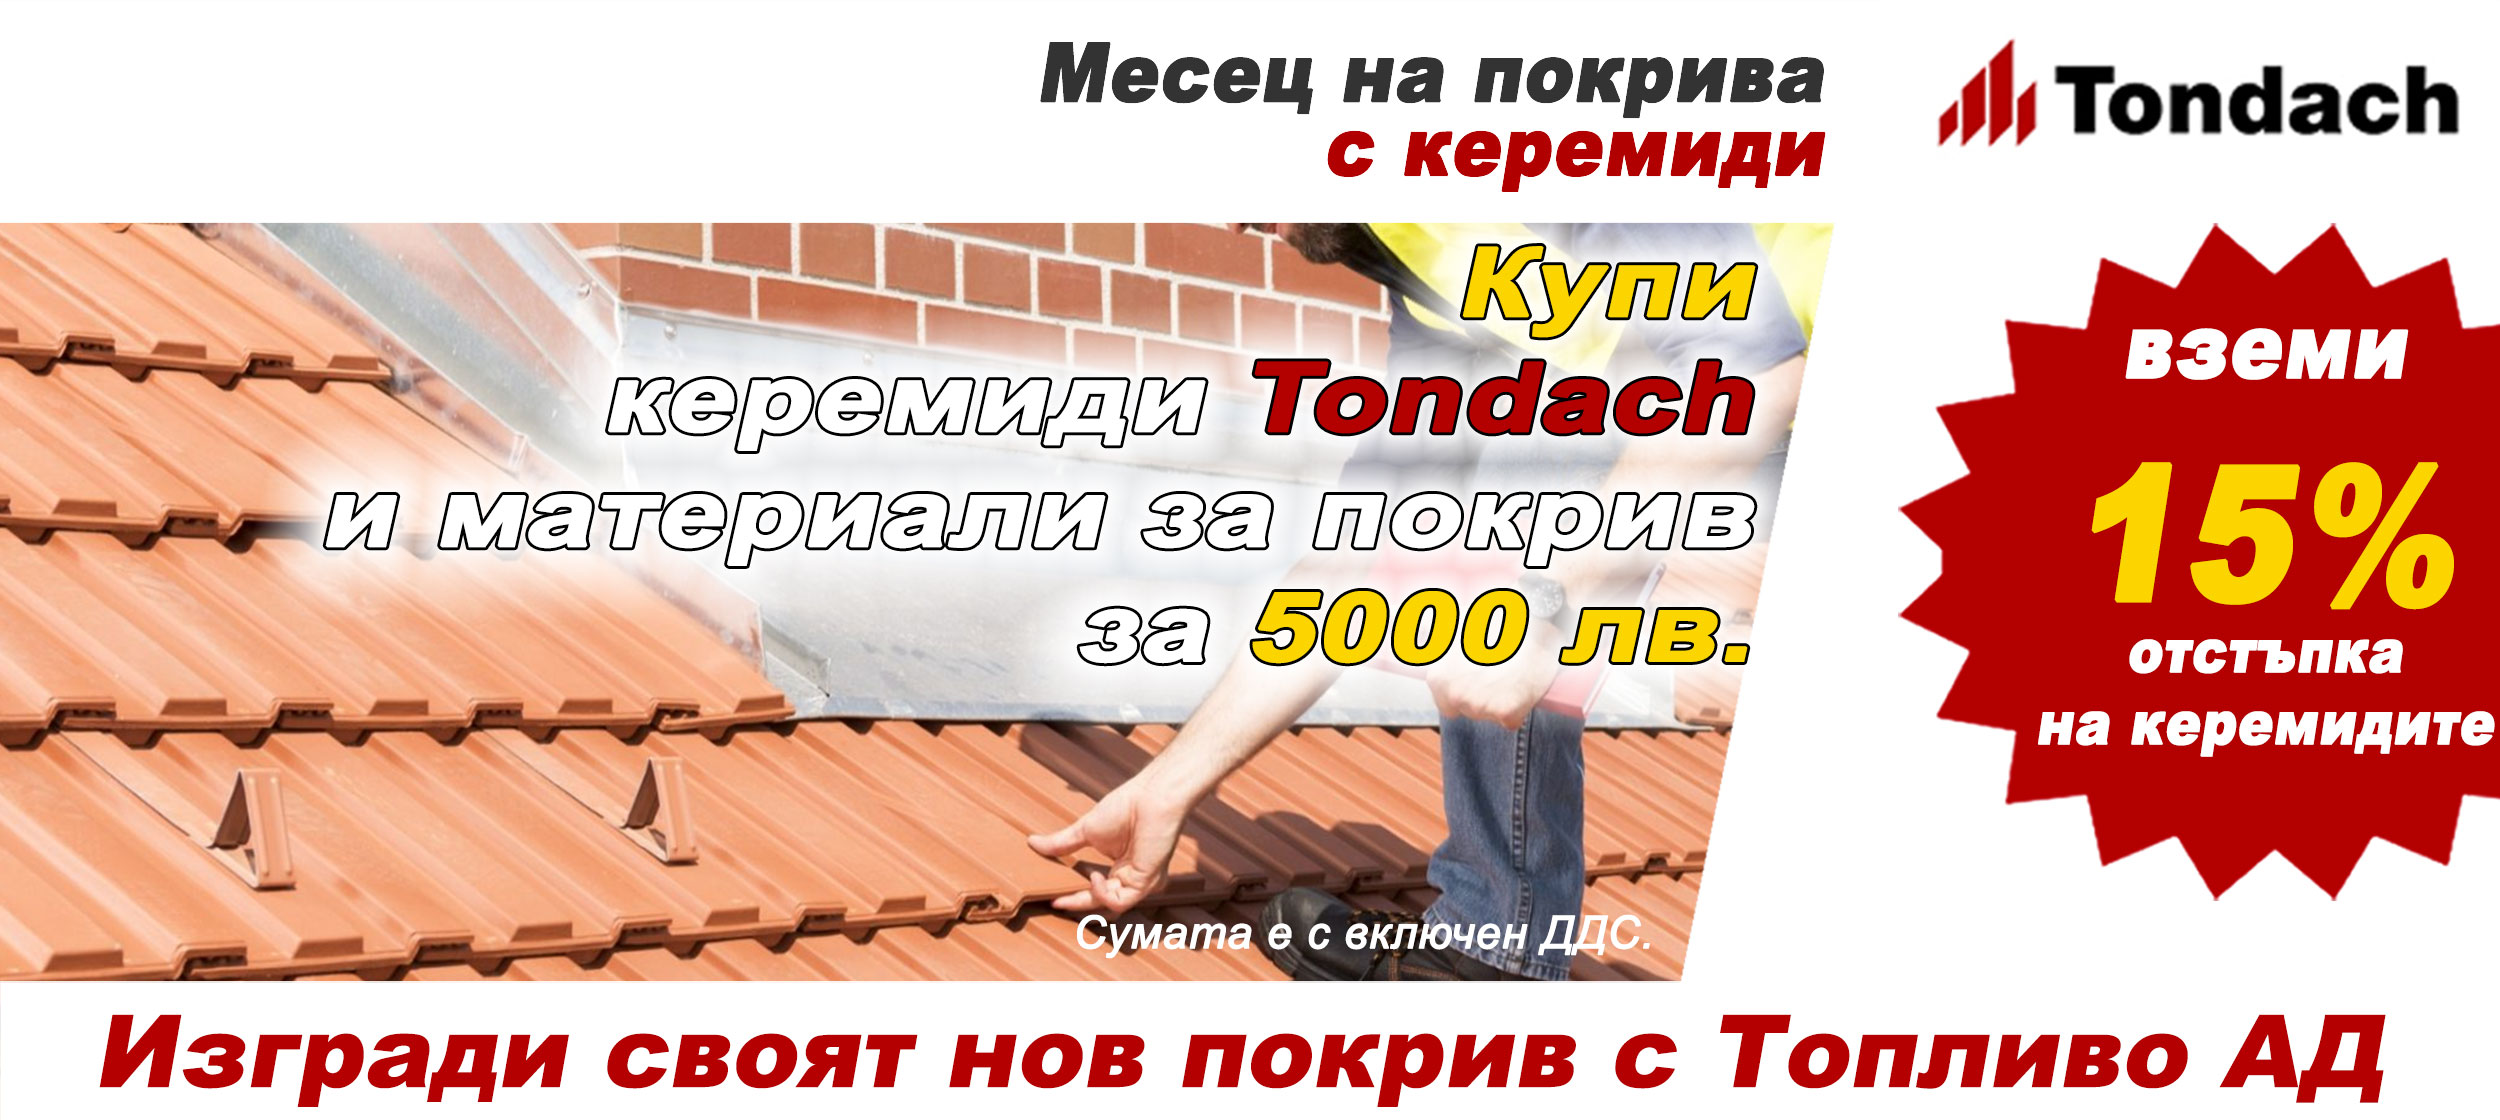 Roof month - 15% discount on TONDACH roof tiles